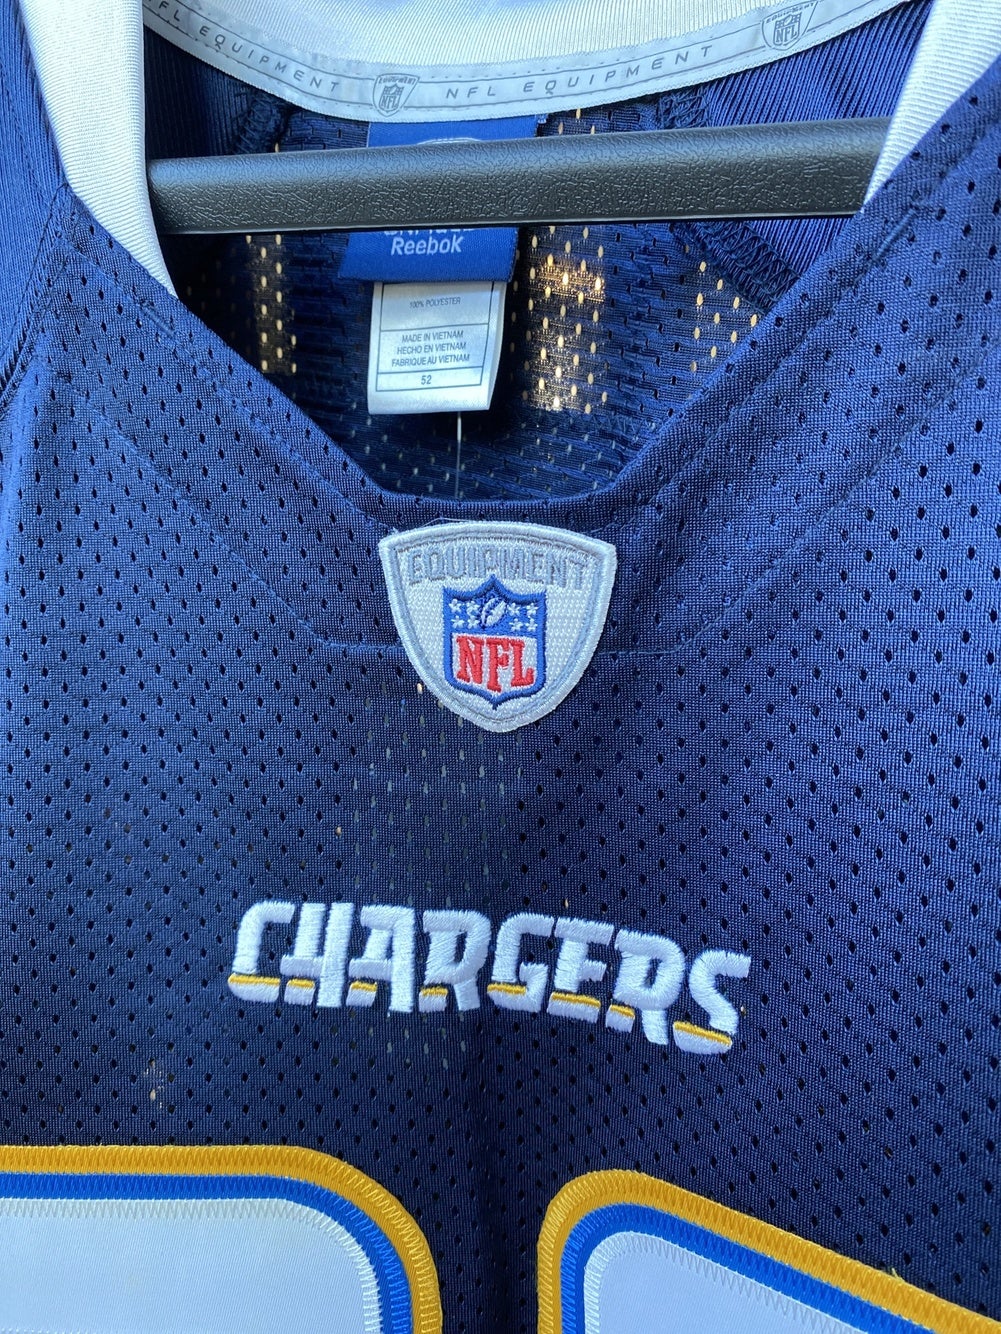 Luis Castillo autographed Chargers jersey - collectibles - by